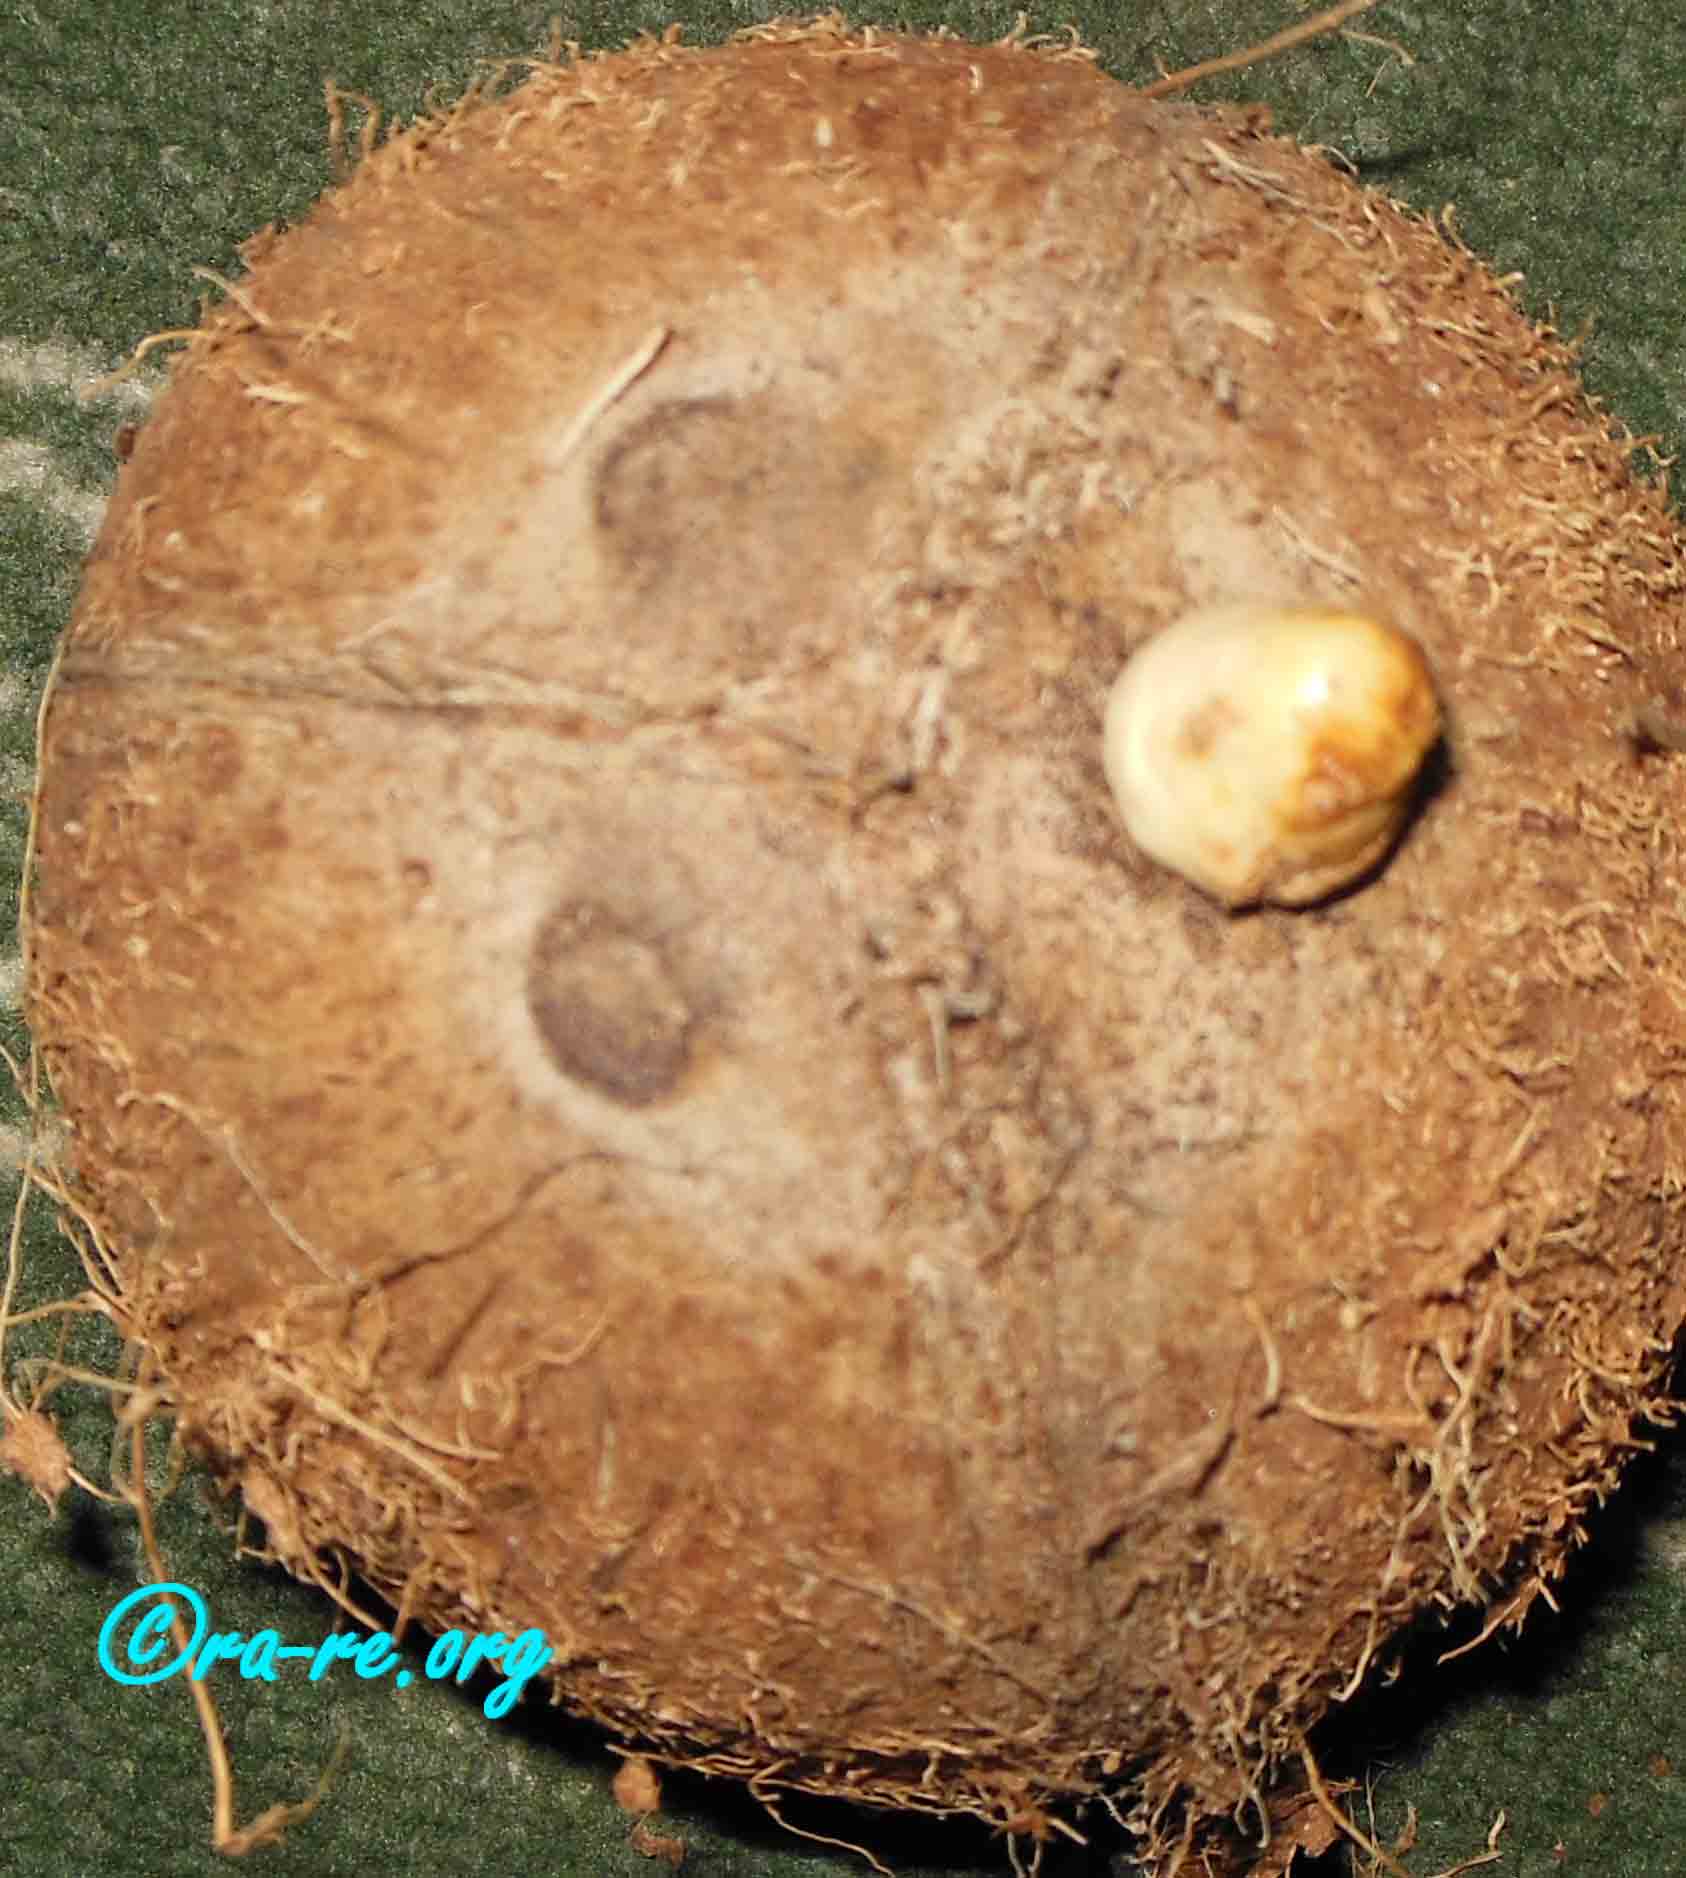 coconut-germinating-stoma-in-eye-holes